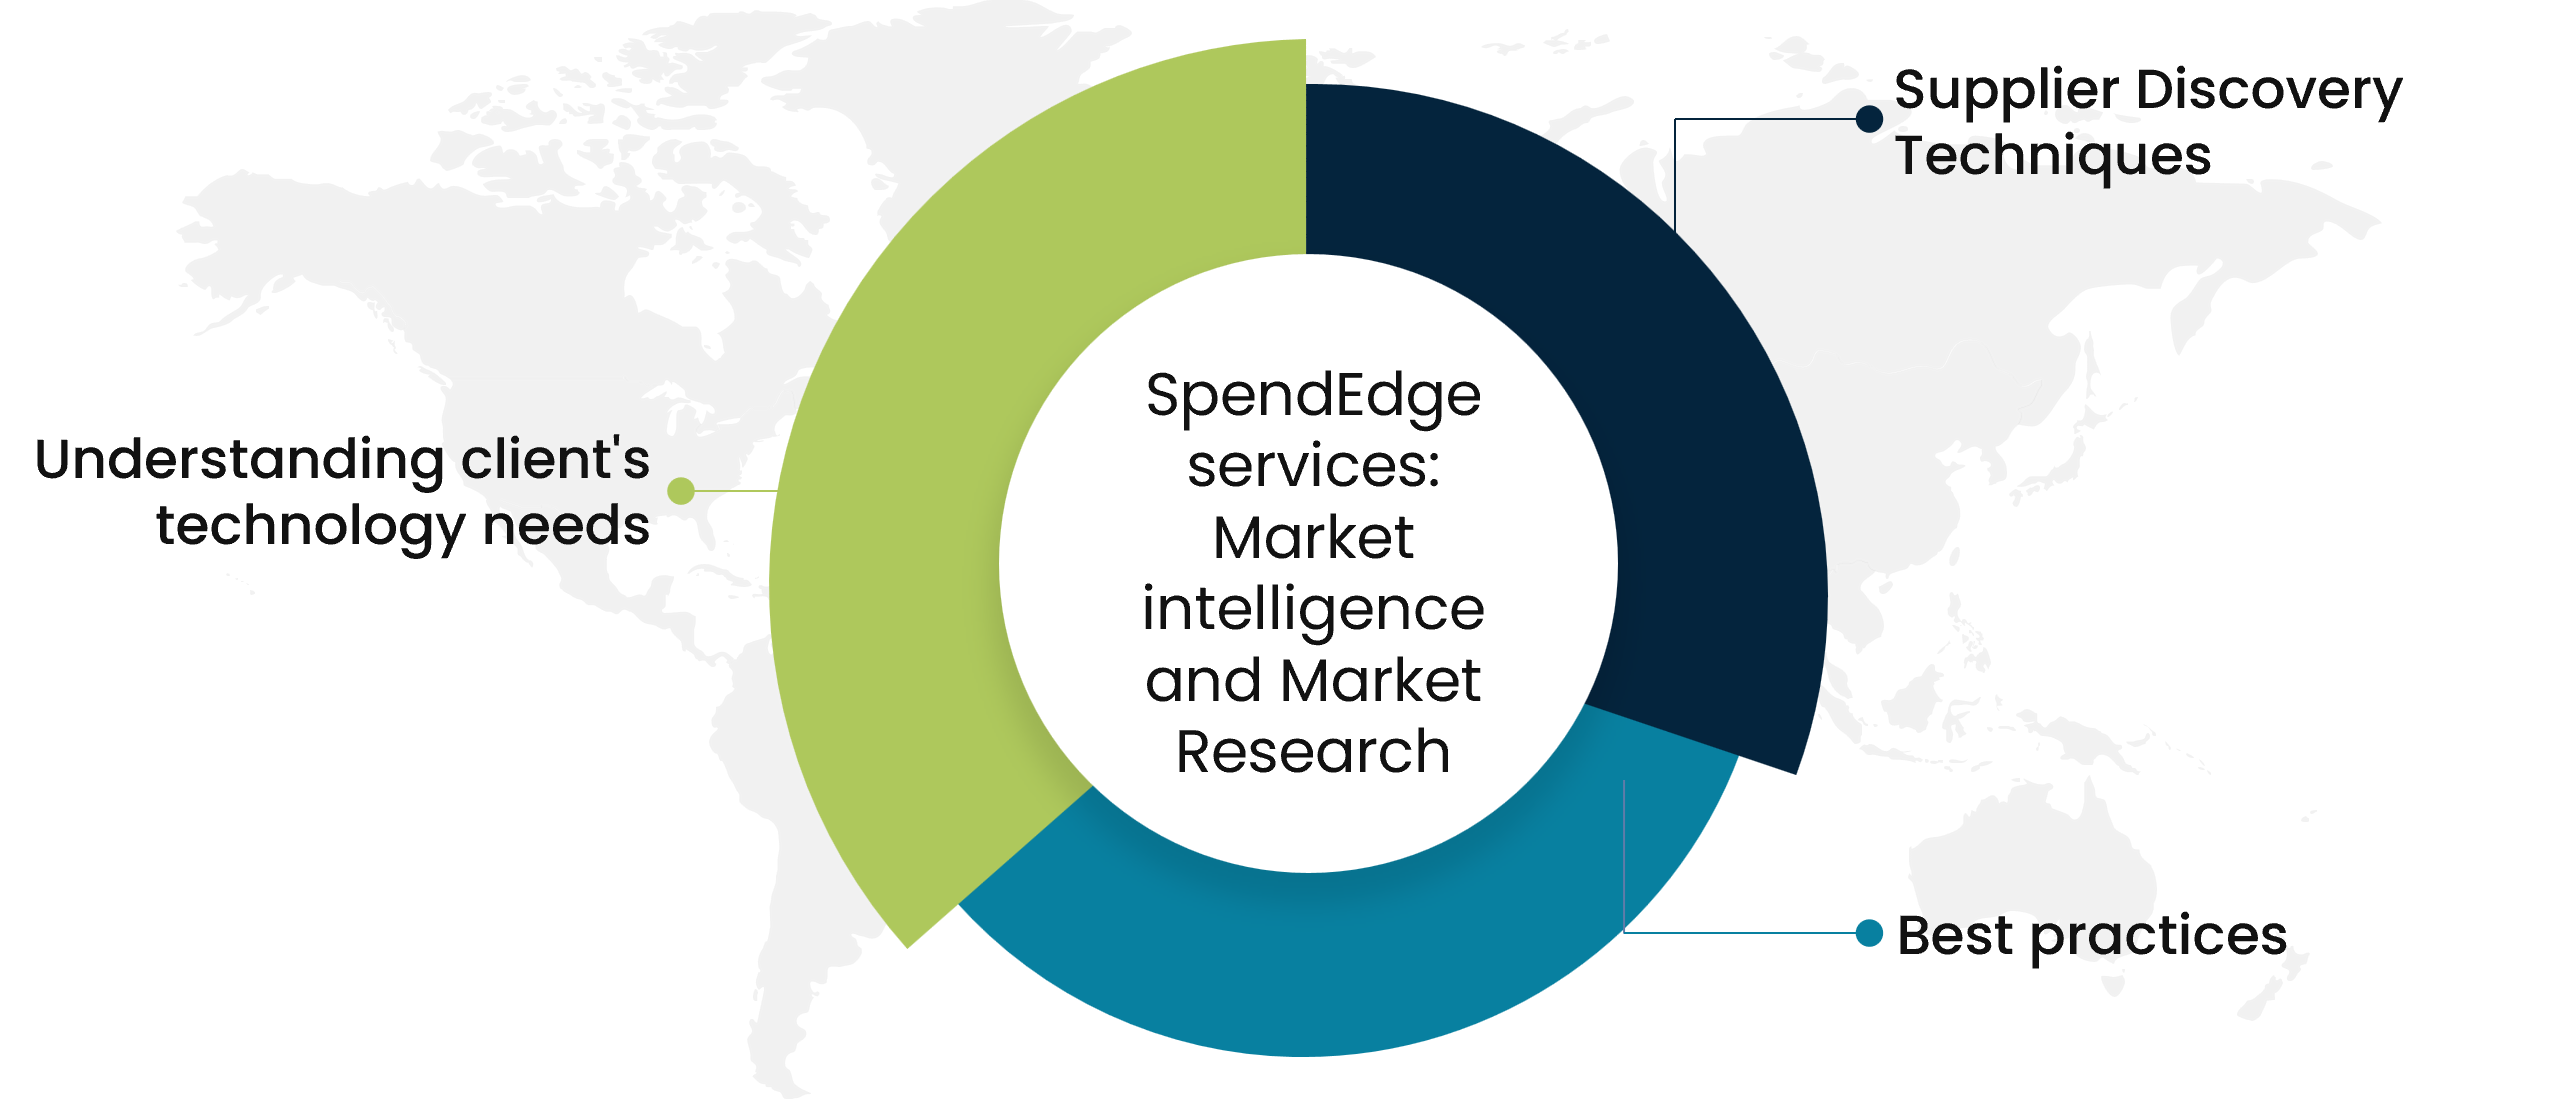 SpendEdge services: Market intelligence and Market Research